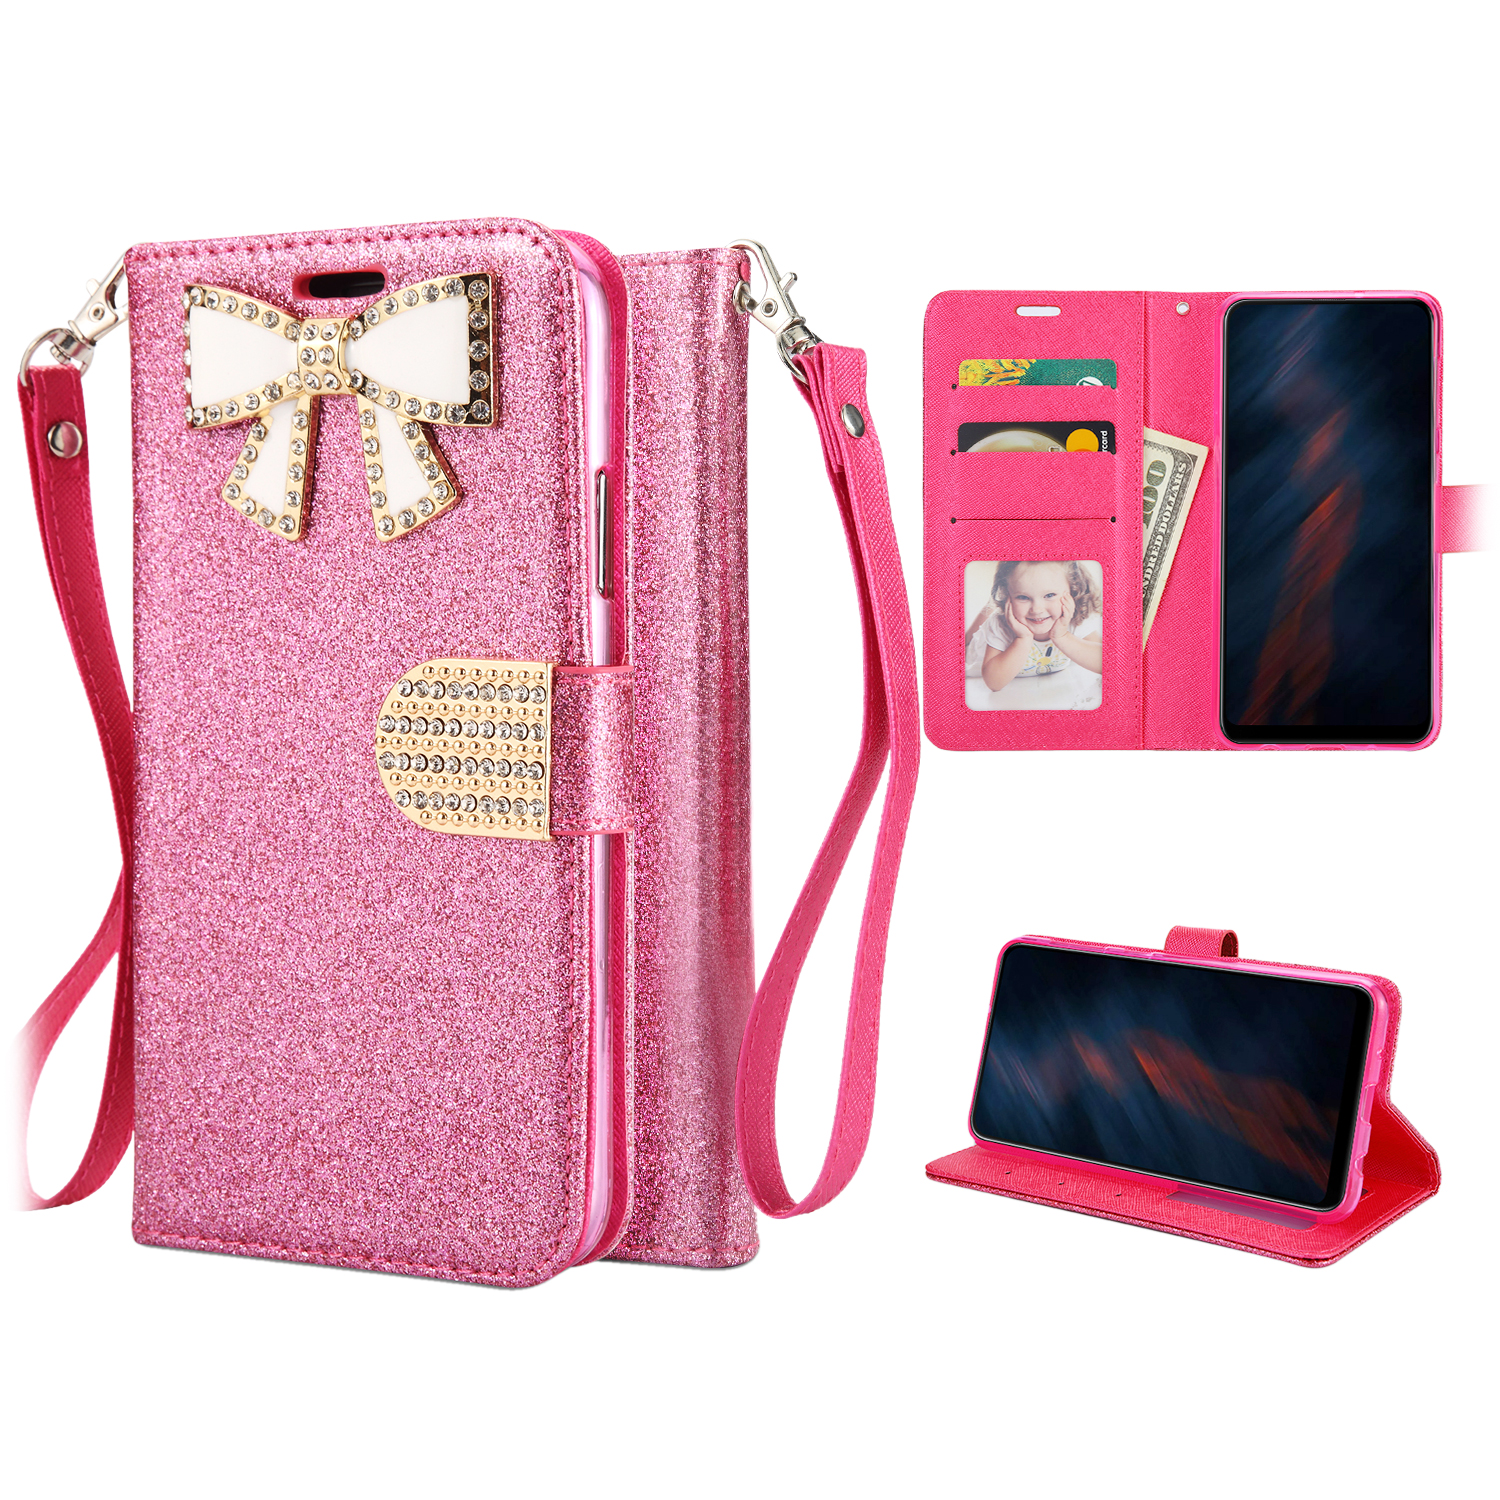 Ribbon Bow Crystal Diamond WALLET Case for Apple iPhone 11 (HotPink)